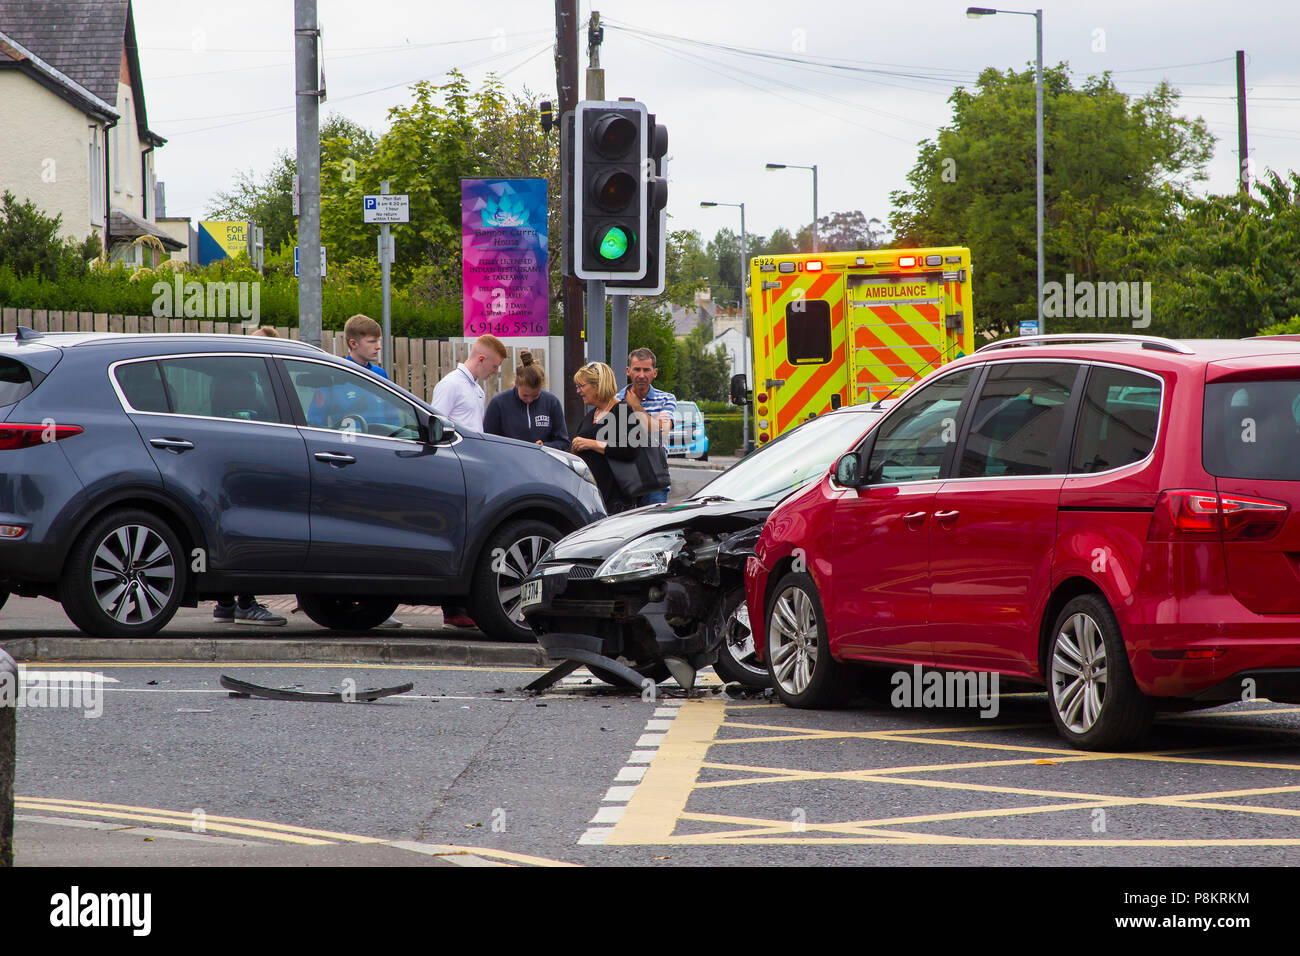 Ballyholme, Northern Ireland. 12th July 2018. A multi vehicle road traffic accident at Ballyholme in Bangor County Ddown Northern Ireland with two ambulances in attendance. details of any injured persons are not yet available but the image shows extensive damge to vehichles with one having mounted the pavement at the entrance to the Windmill Road Credit: MHarp/Alamy Live News Stock Photo